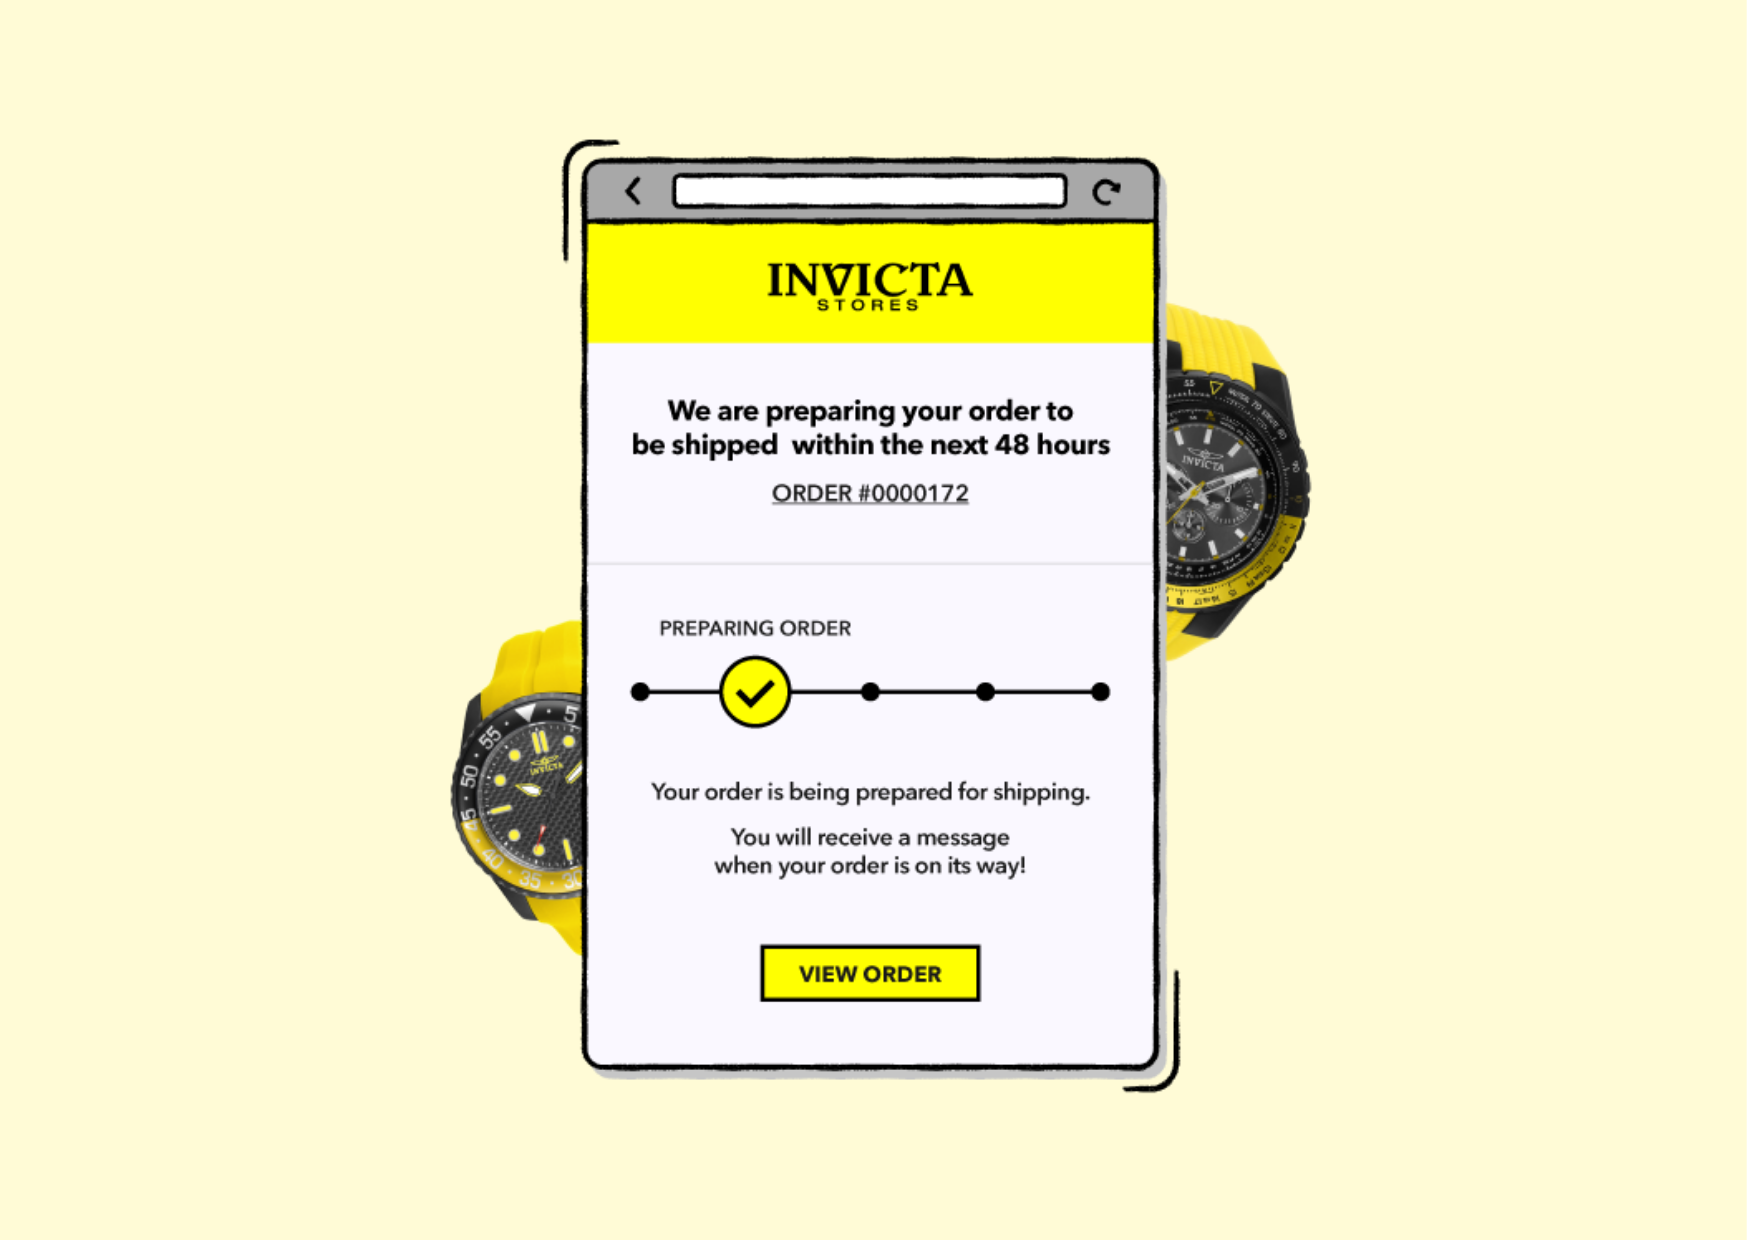 Invicta Creates a Premium Brand Experience and Improves Multi-Location Returns For Efficiency